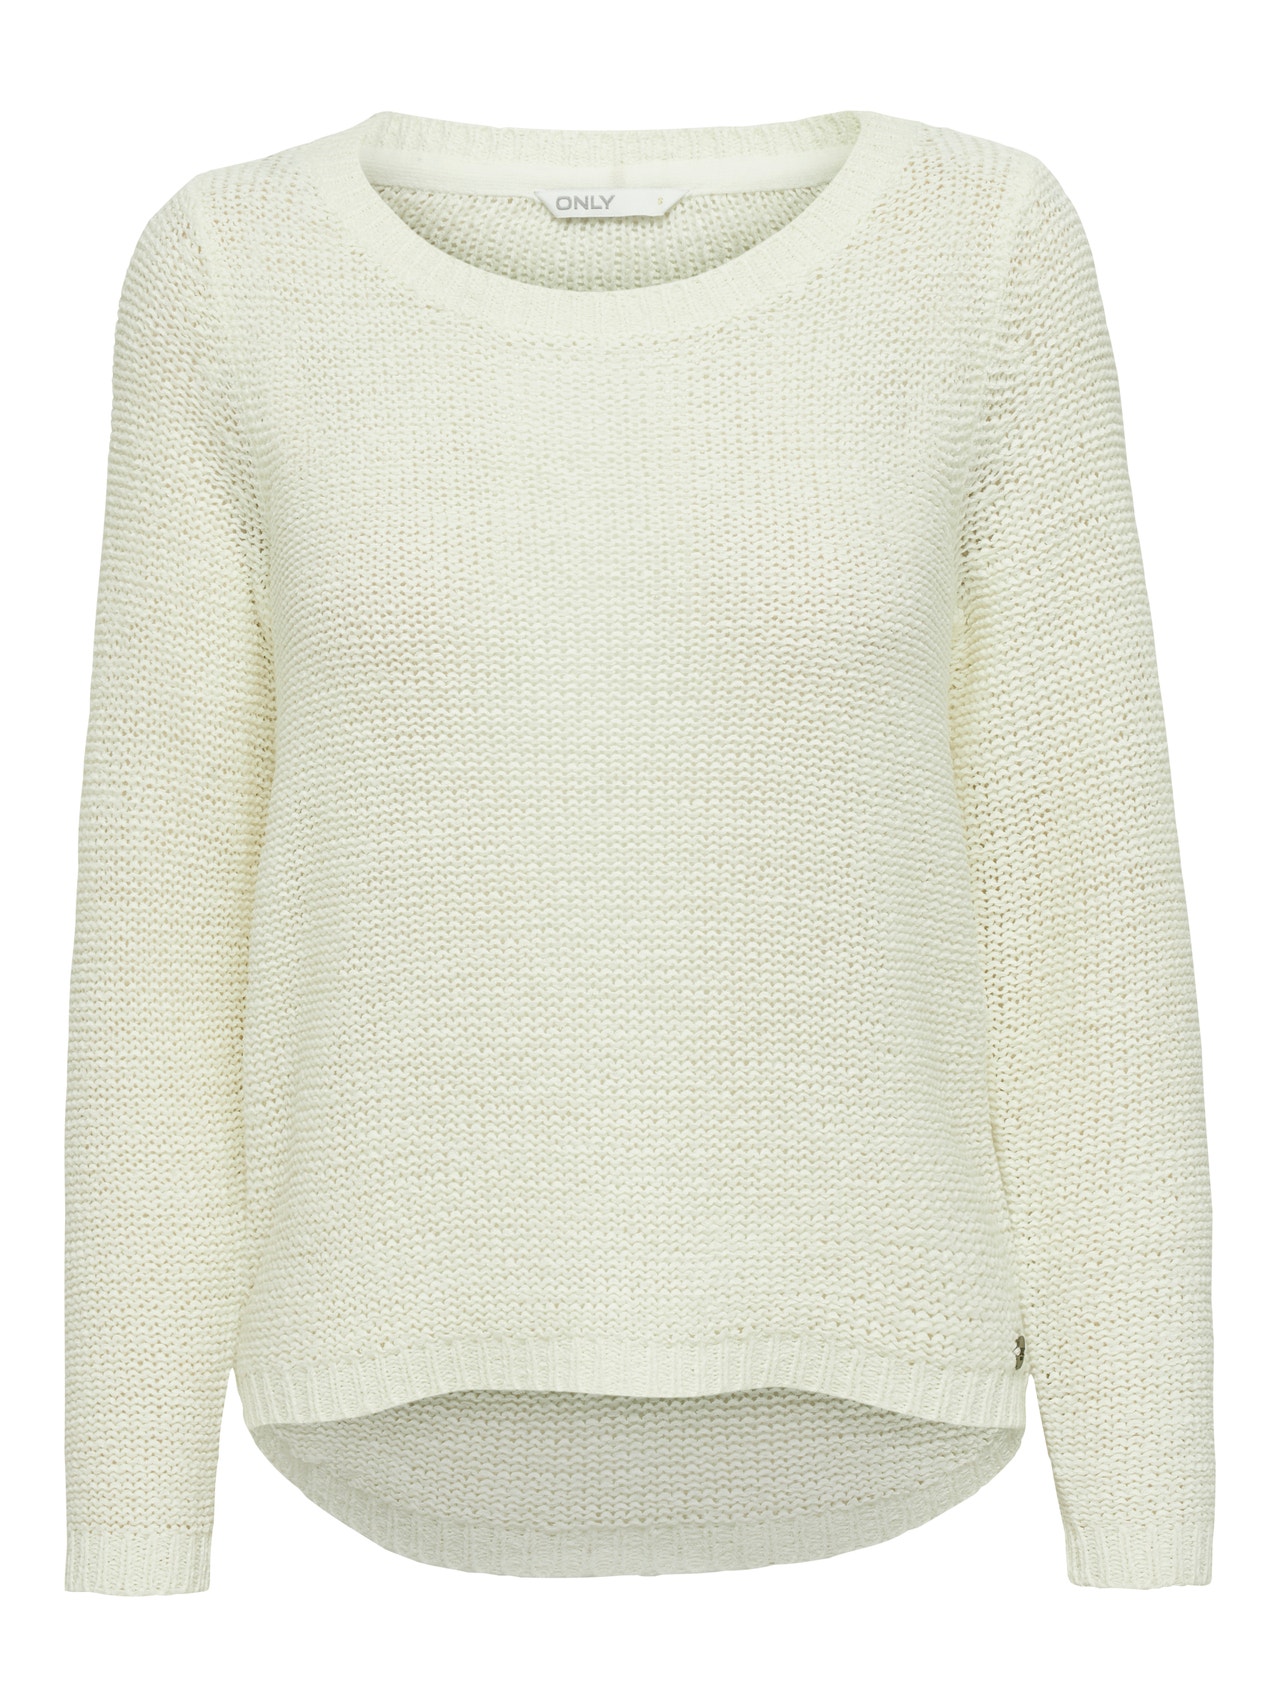 ONLY Texture Knitted Pullover -Cloud Dancer - 15113356